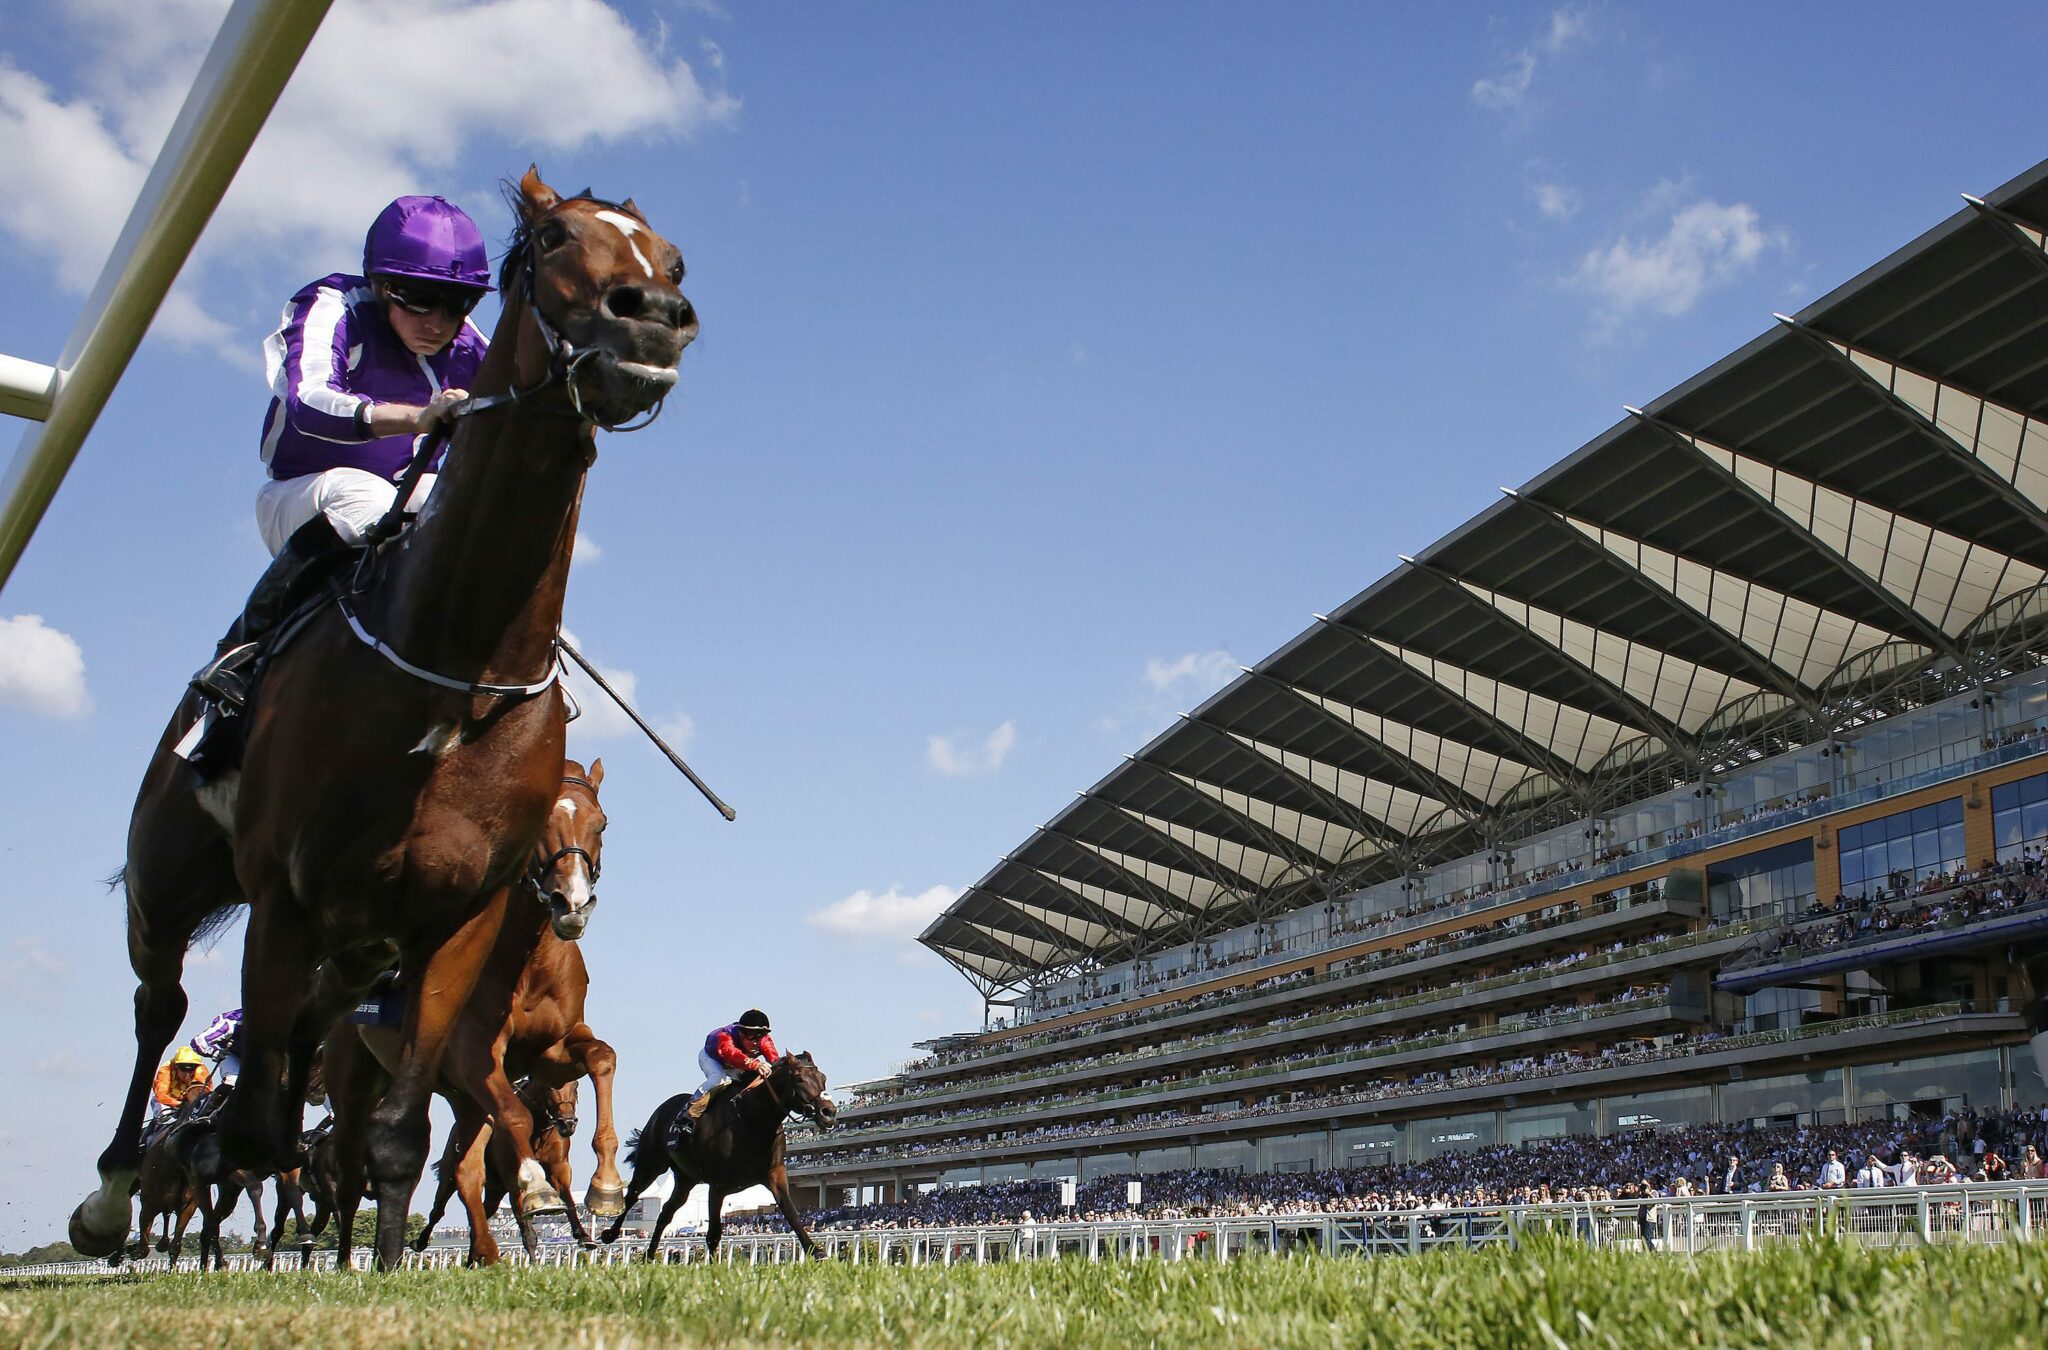 Image of jockey on a horse riding on the racetrack at Ascot